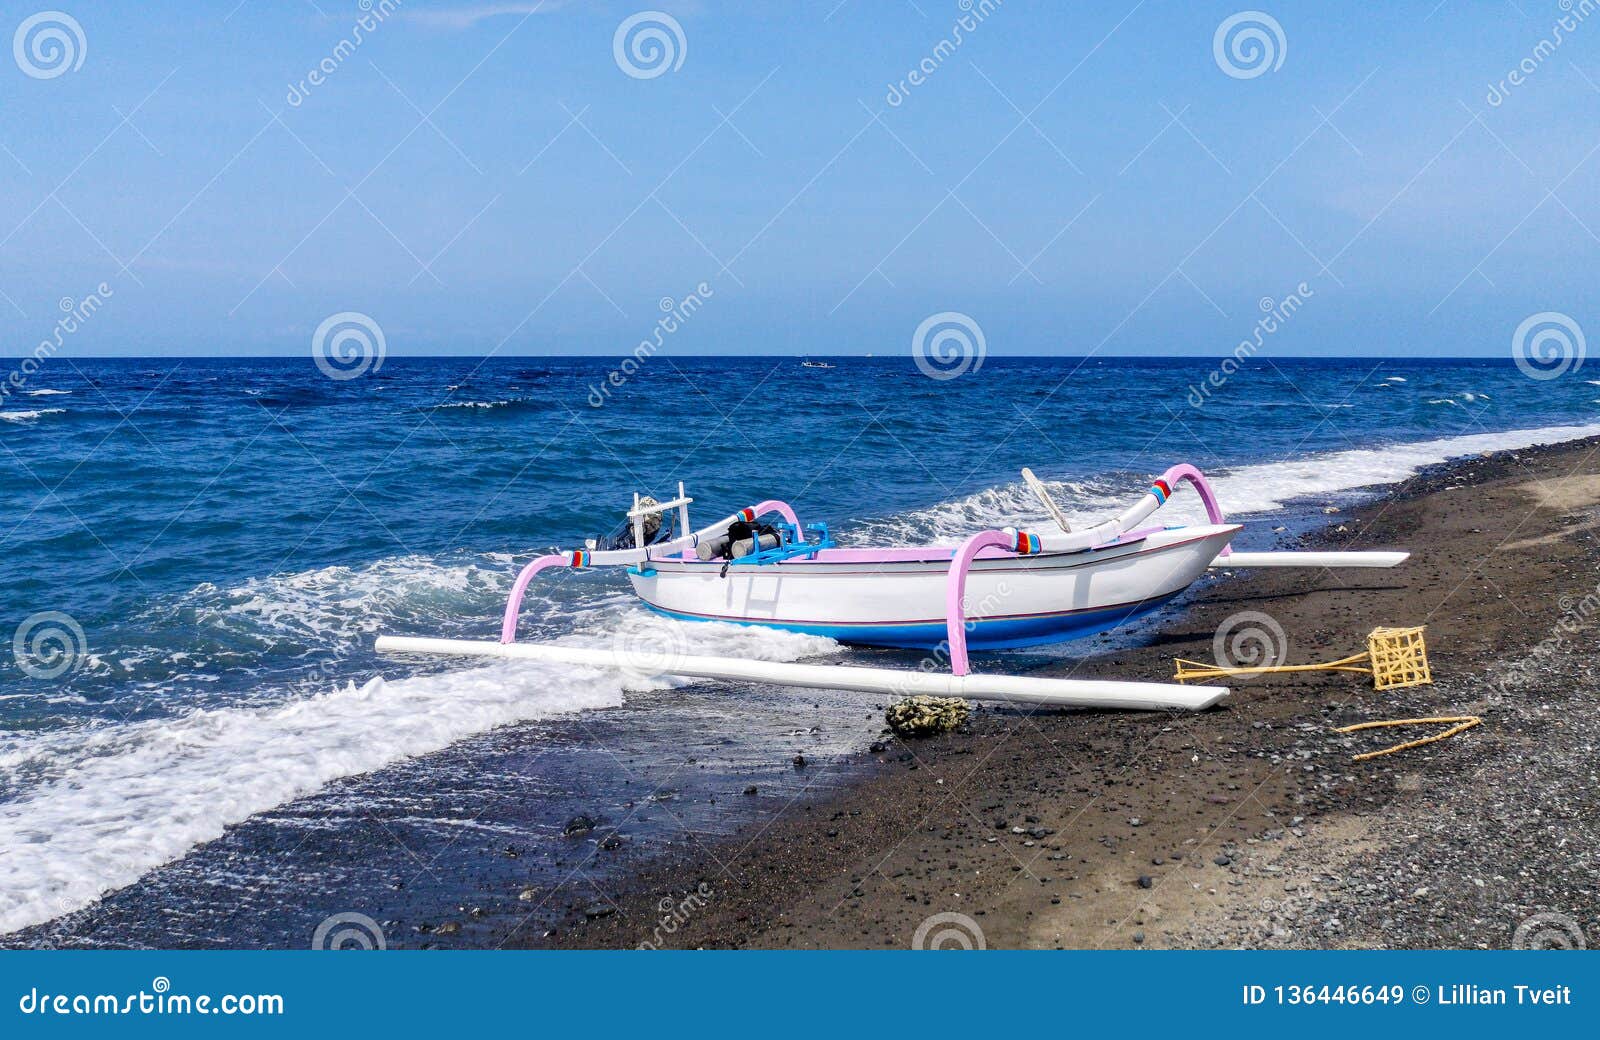 jukung, the traditional balinese fishing boat, at the beach in amed. bali, indonesia